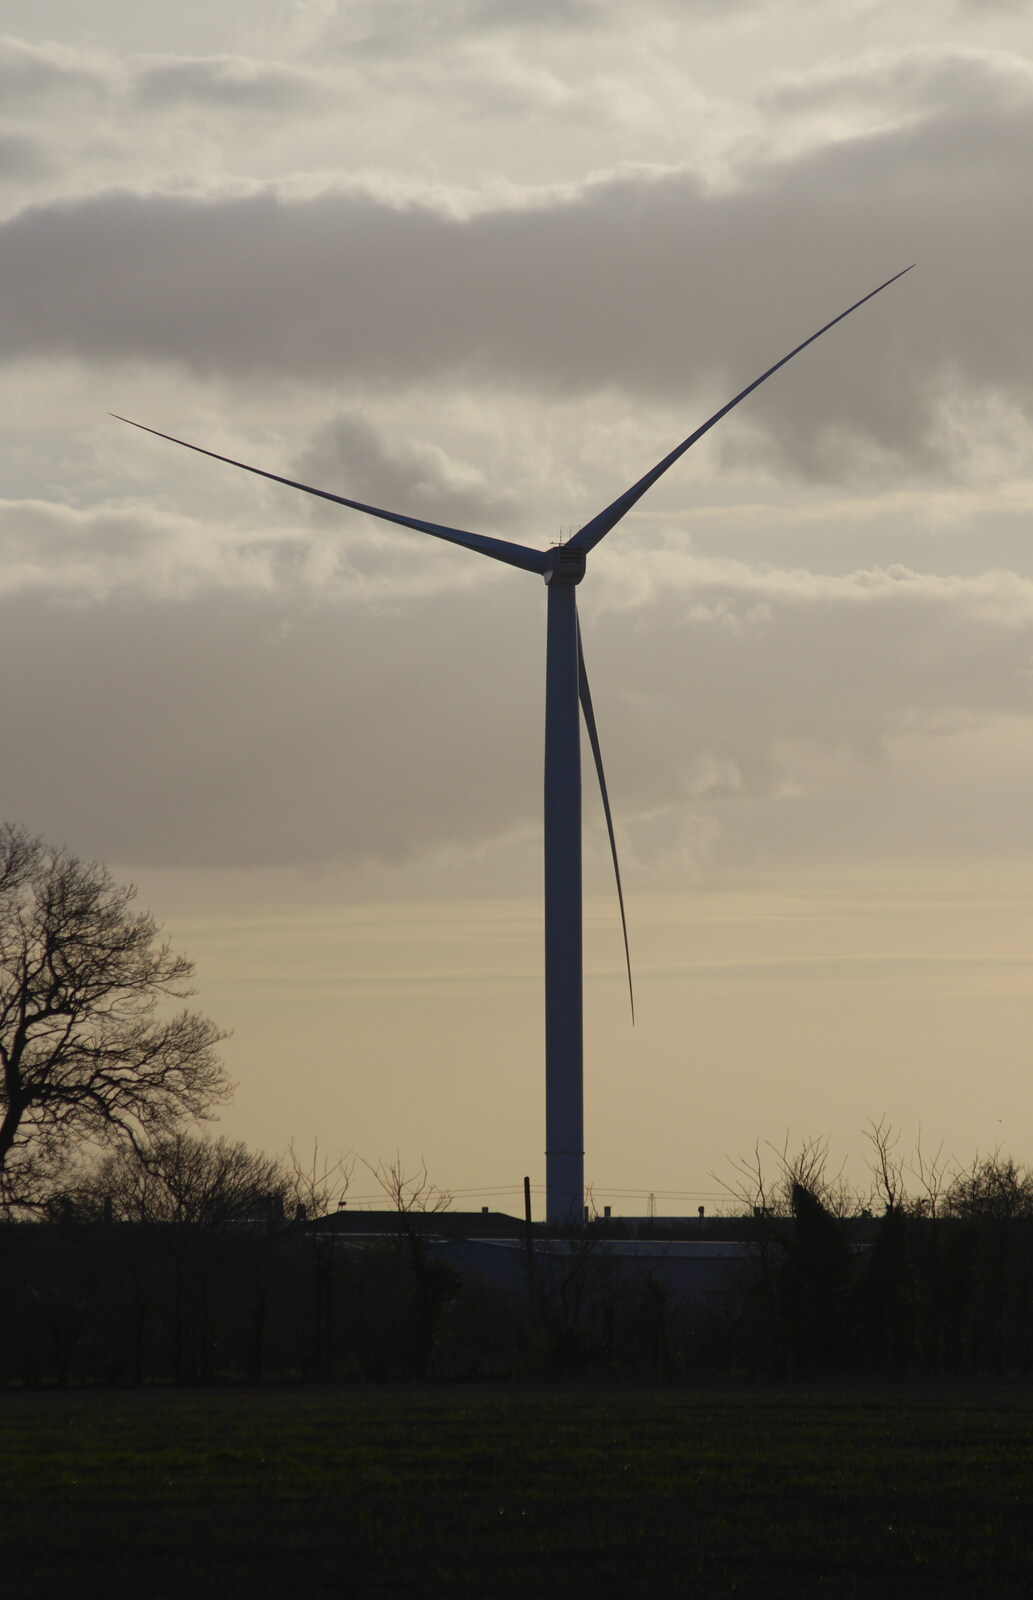 A solitary wind turbine from A Trip to see Chinner, Brome, Suffolk - 22nd April 2014